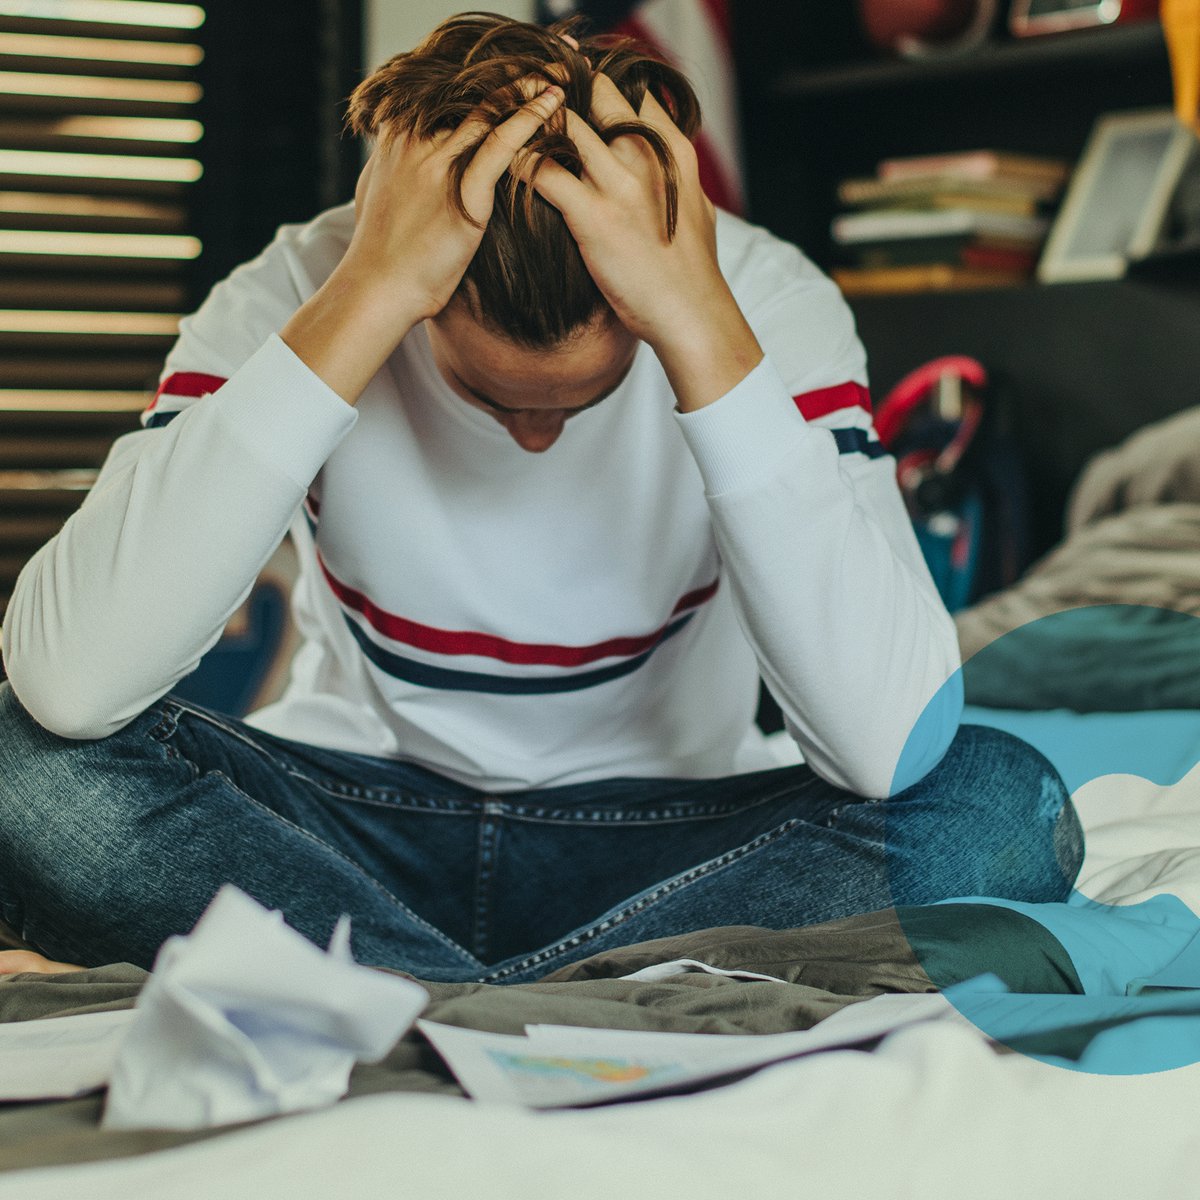 Studying, major works & testing schedules are already the ultimate juggling act, but when cancer comes crashing into a young persons world, things can seem almost impossible. Here are our top tips on ways to manage stress throughout your #Year12exams: bit.ly/3TuOfRj